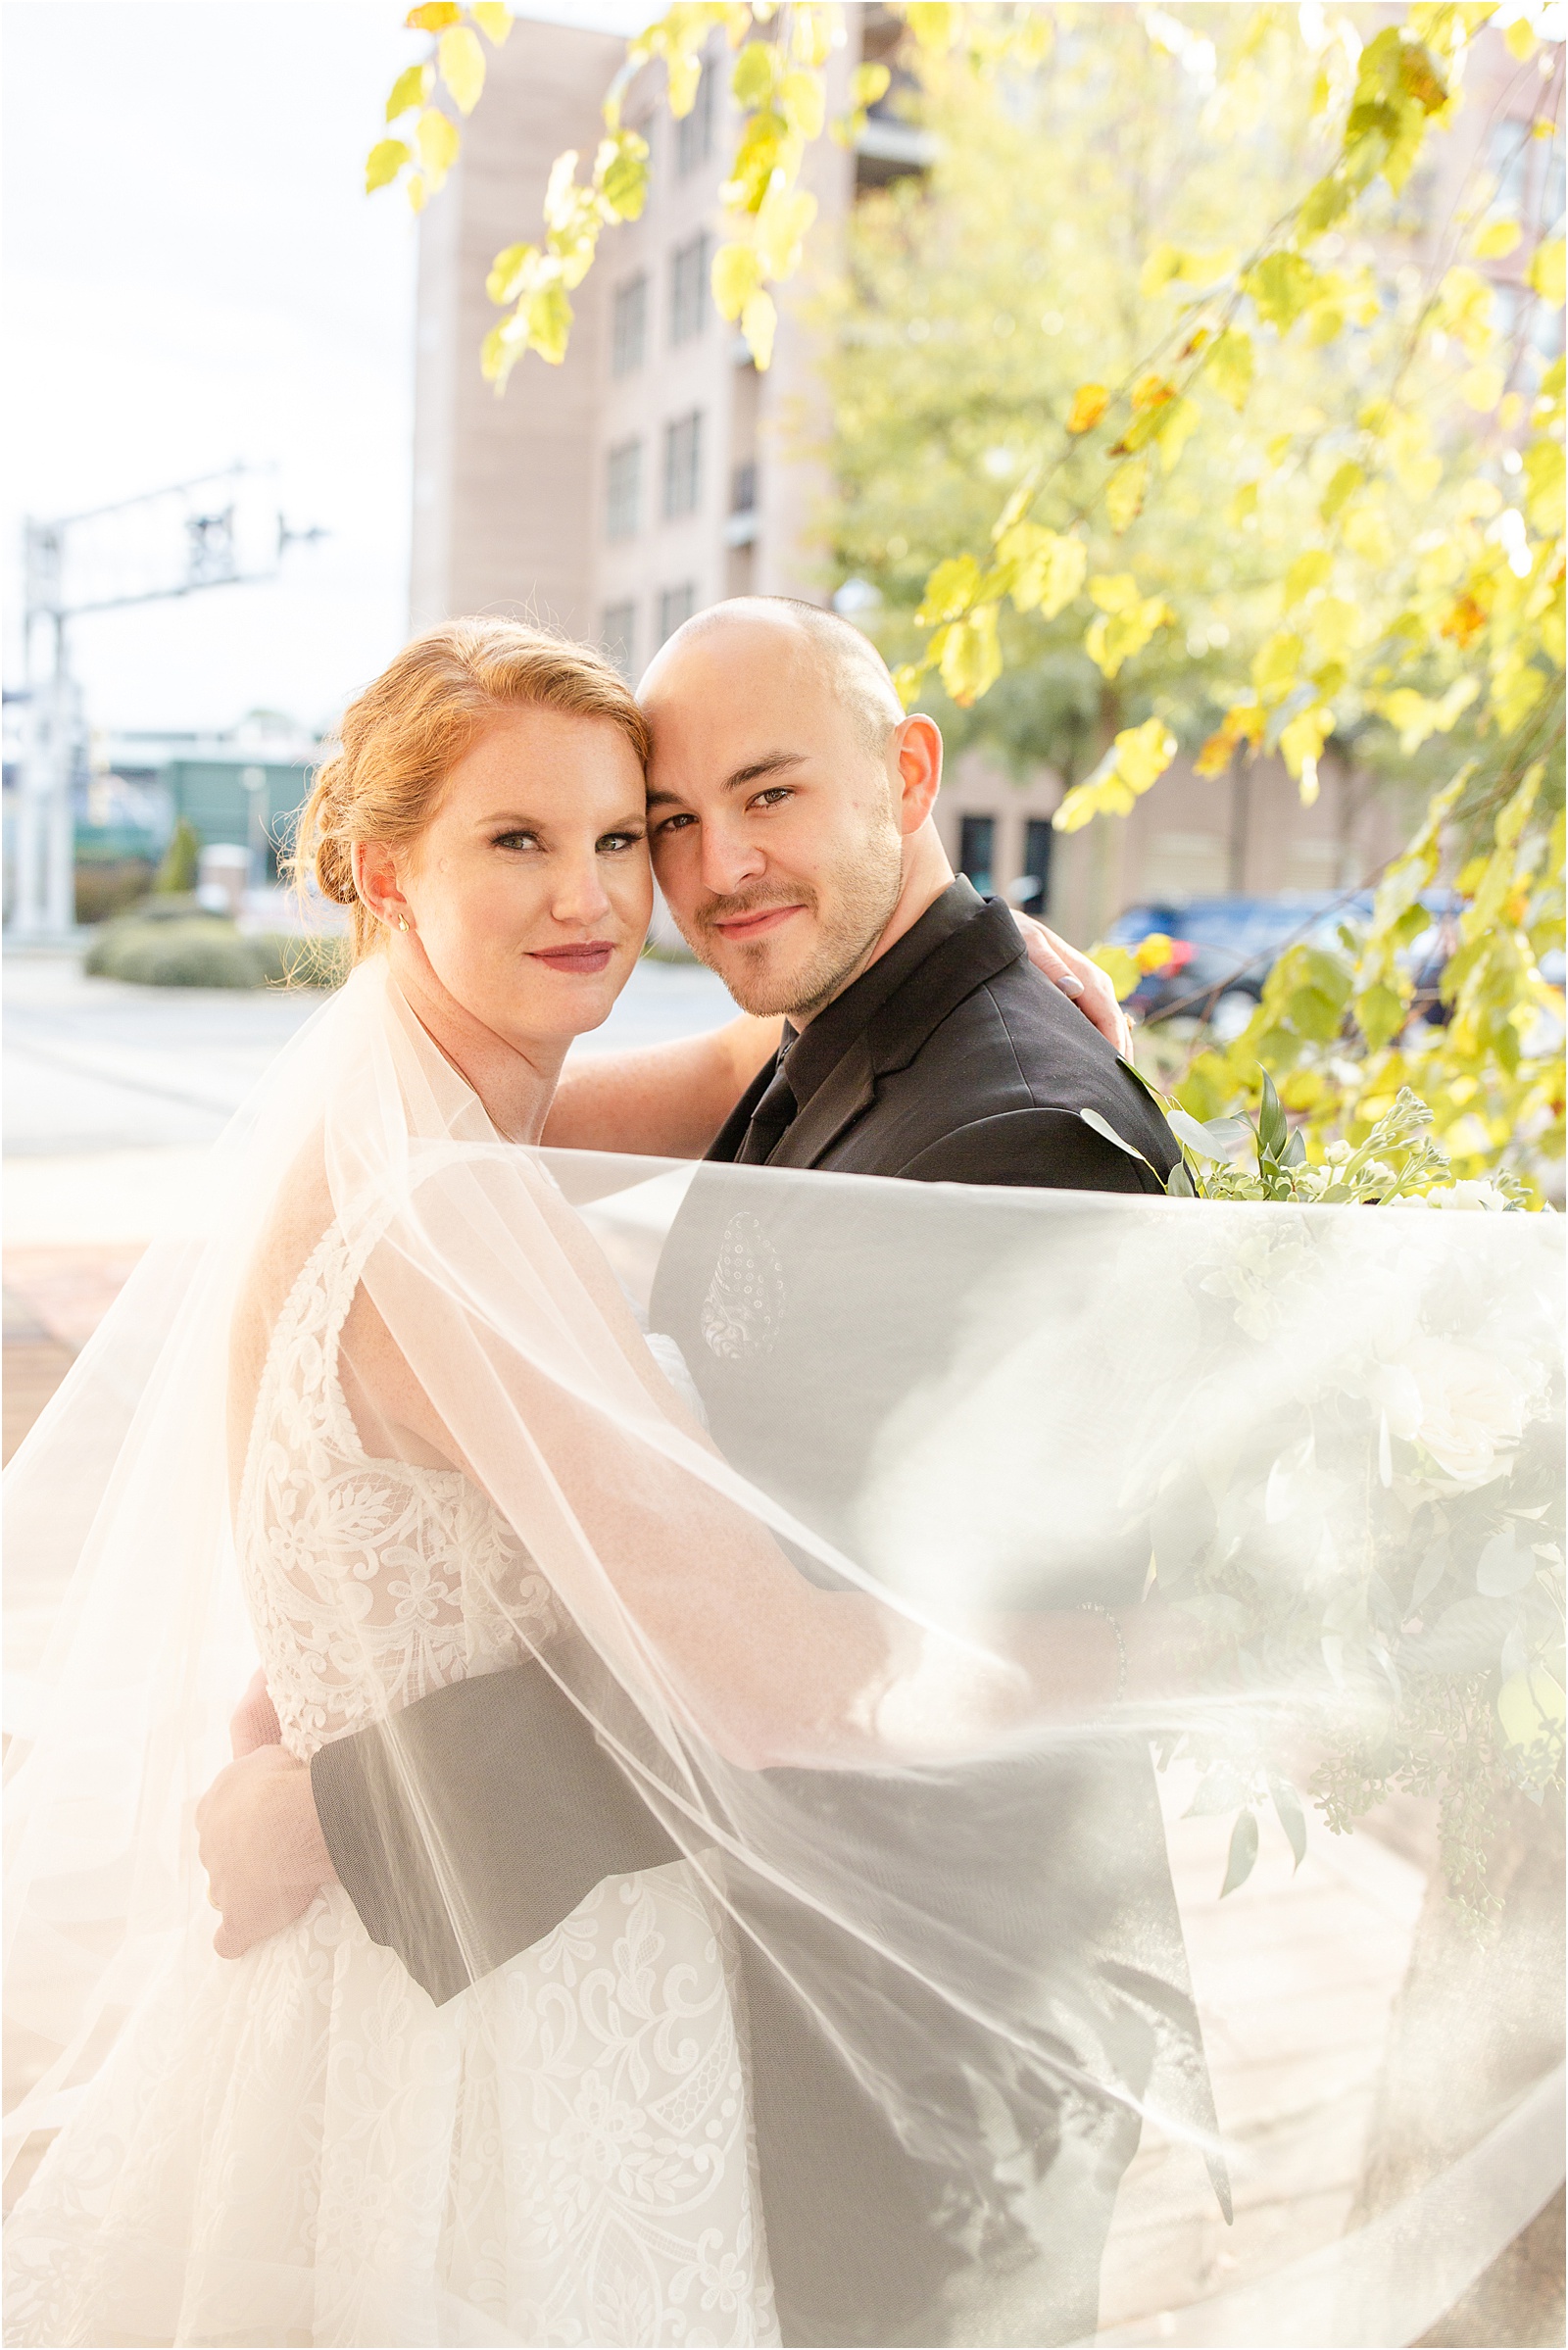 Just married couple looks at camera with veil blowing across